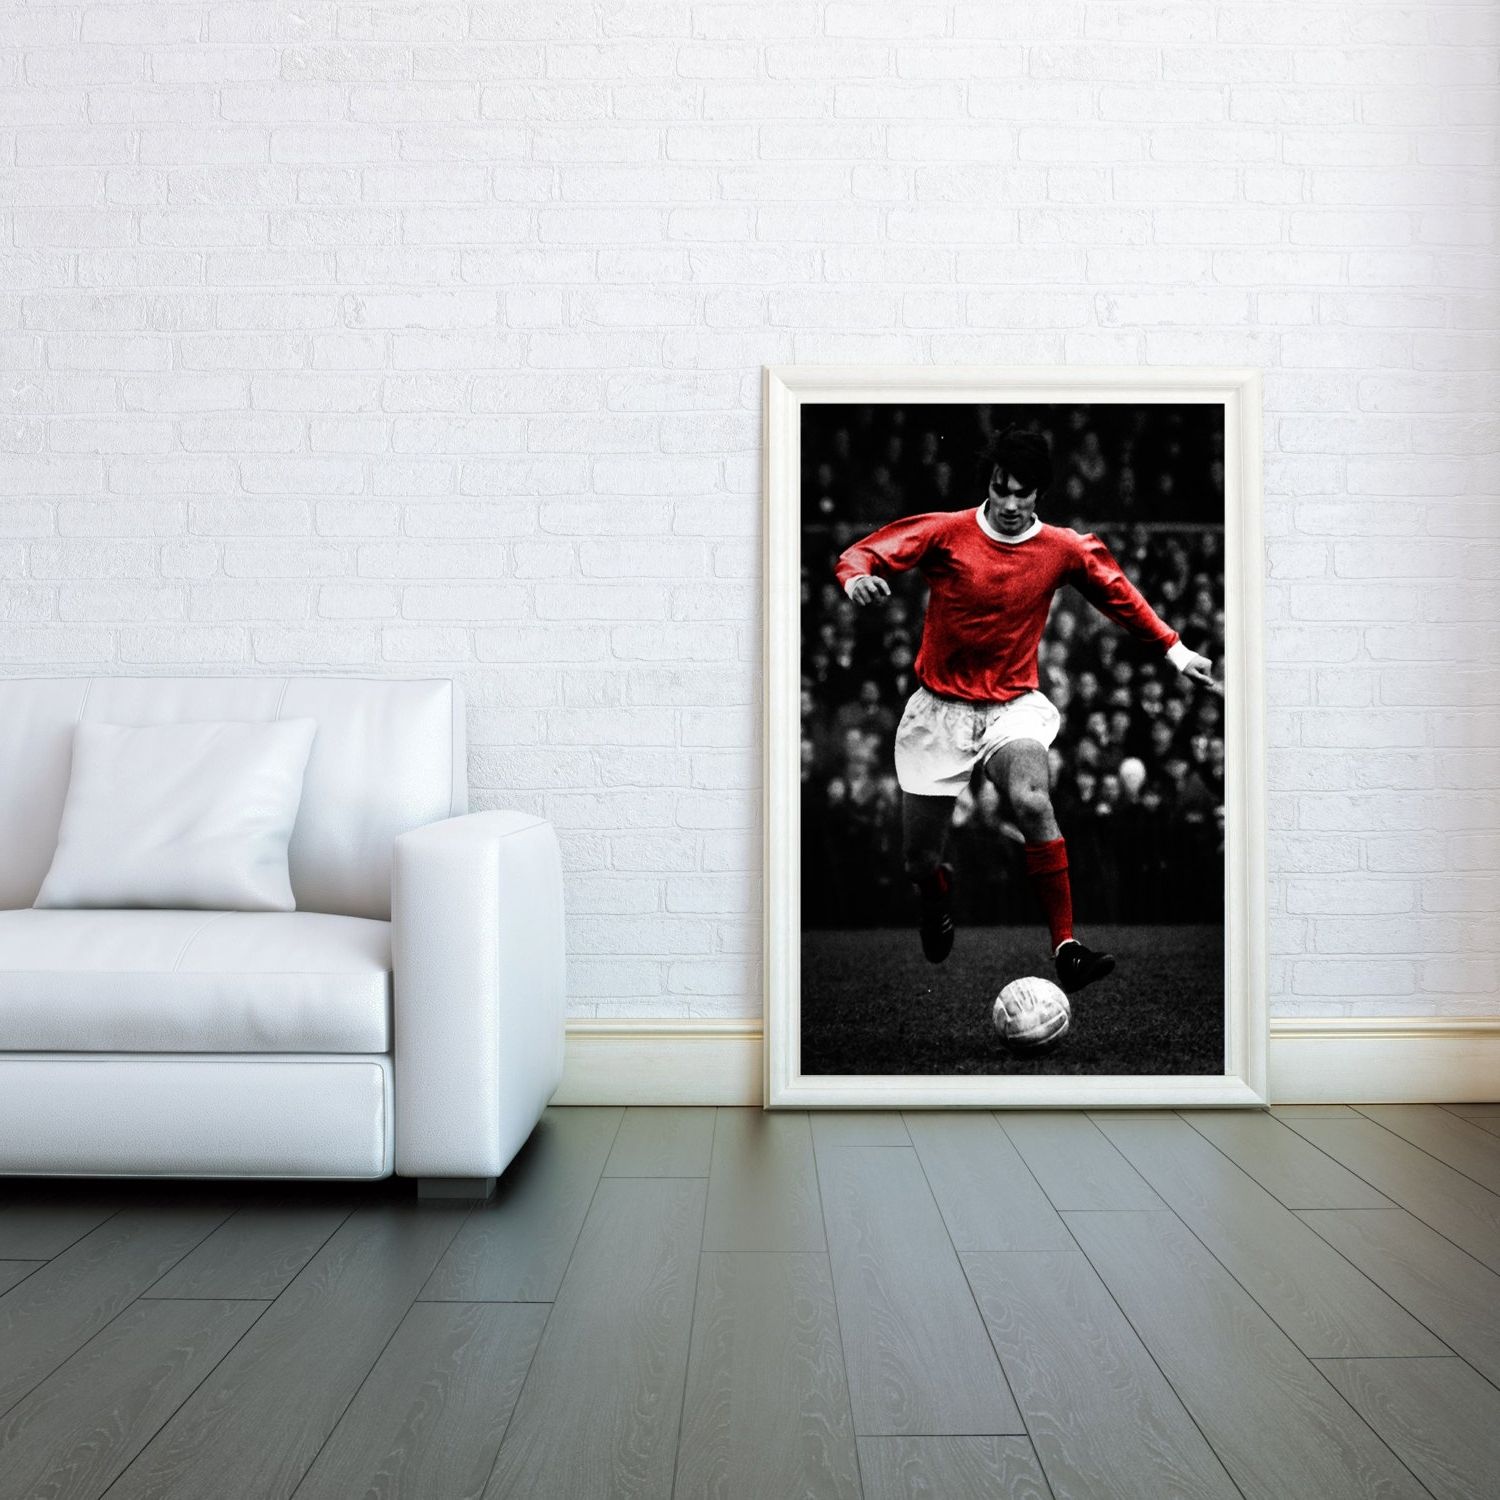 Most Recent George Best Manchester United Decorative Arts Prints & Posters Wall Throughout Black Wall Art (View 20 of 20)